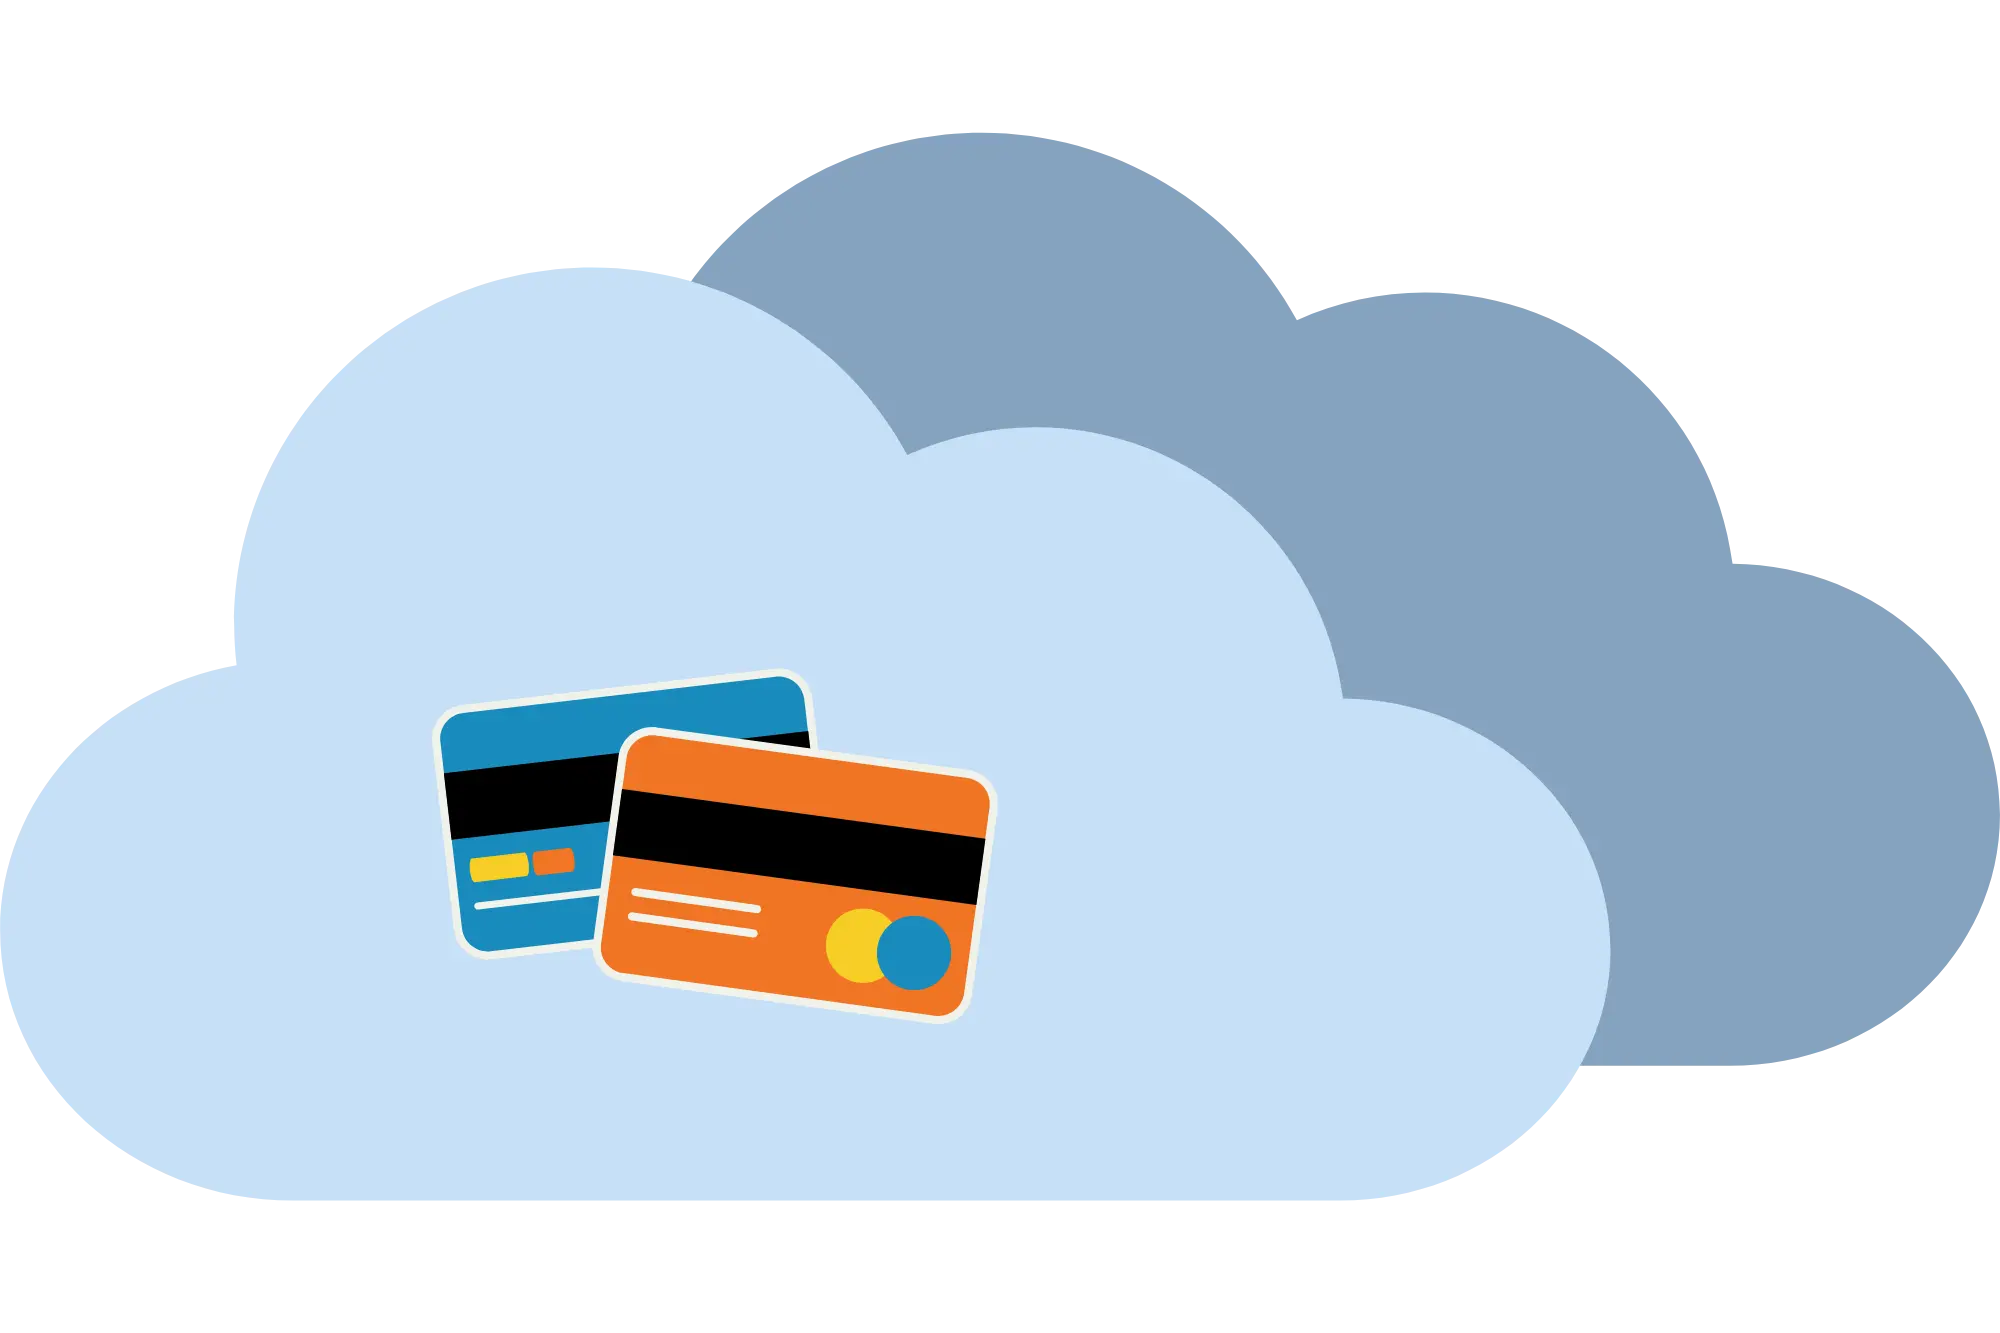 Clouds with credit cards relaxing on them to represent creating a Venmo business account.